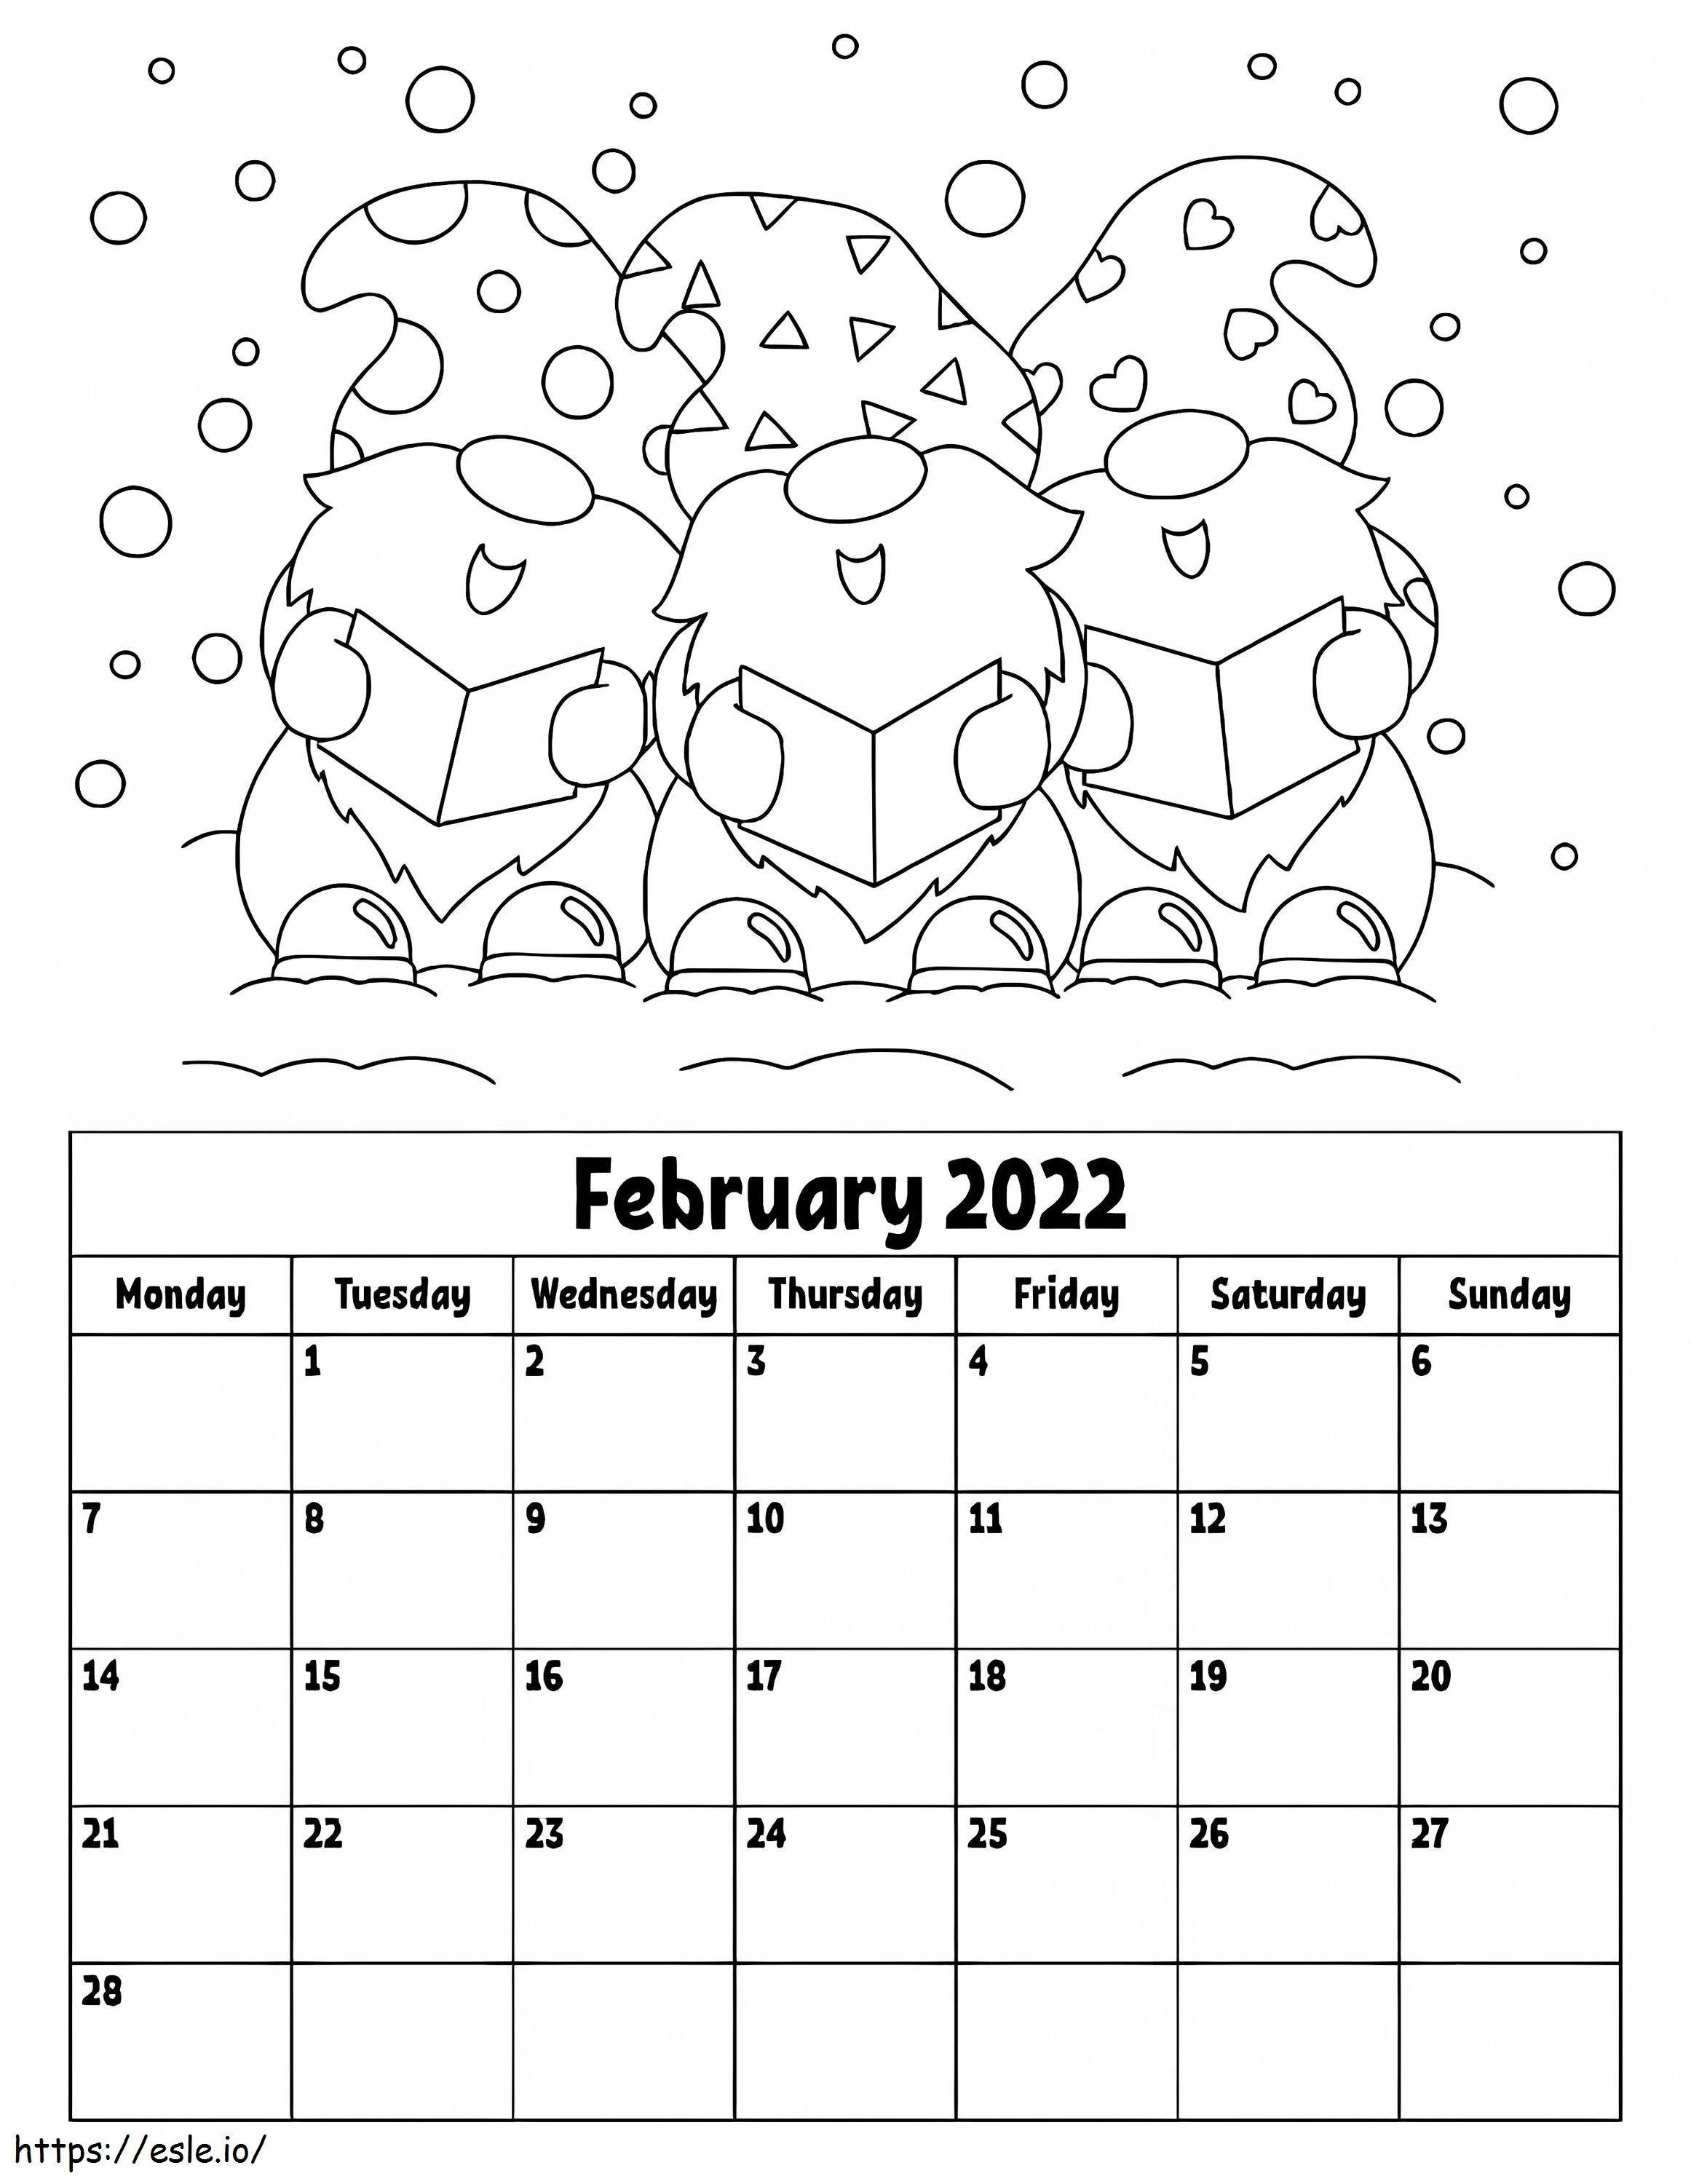 February 2022 Calendar coloring page